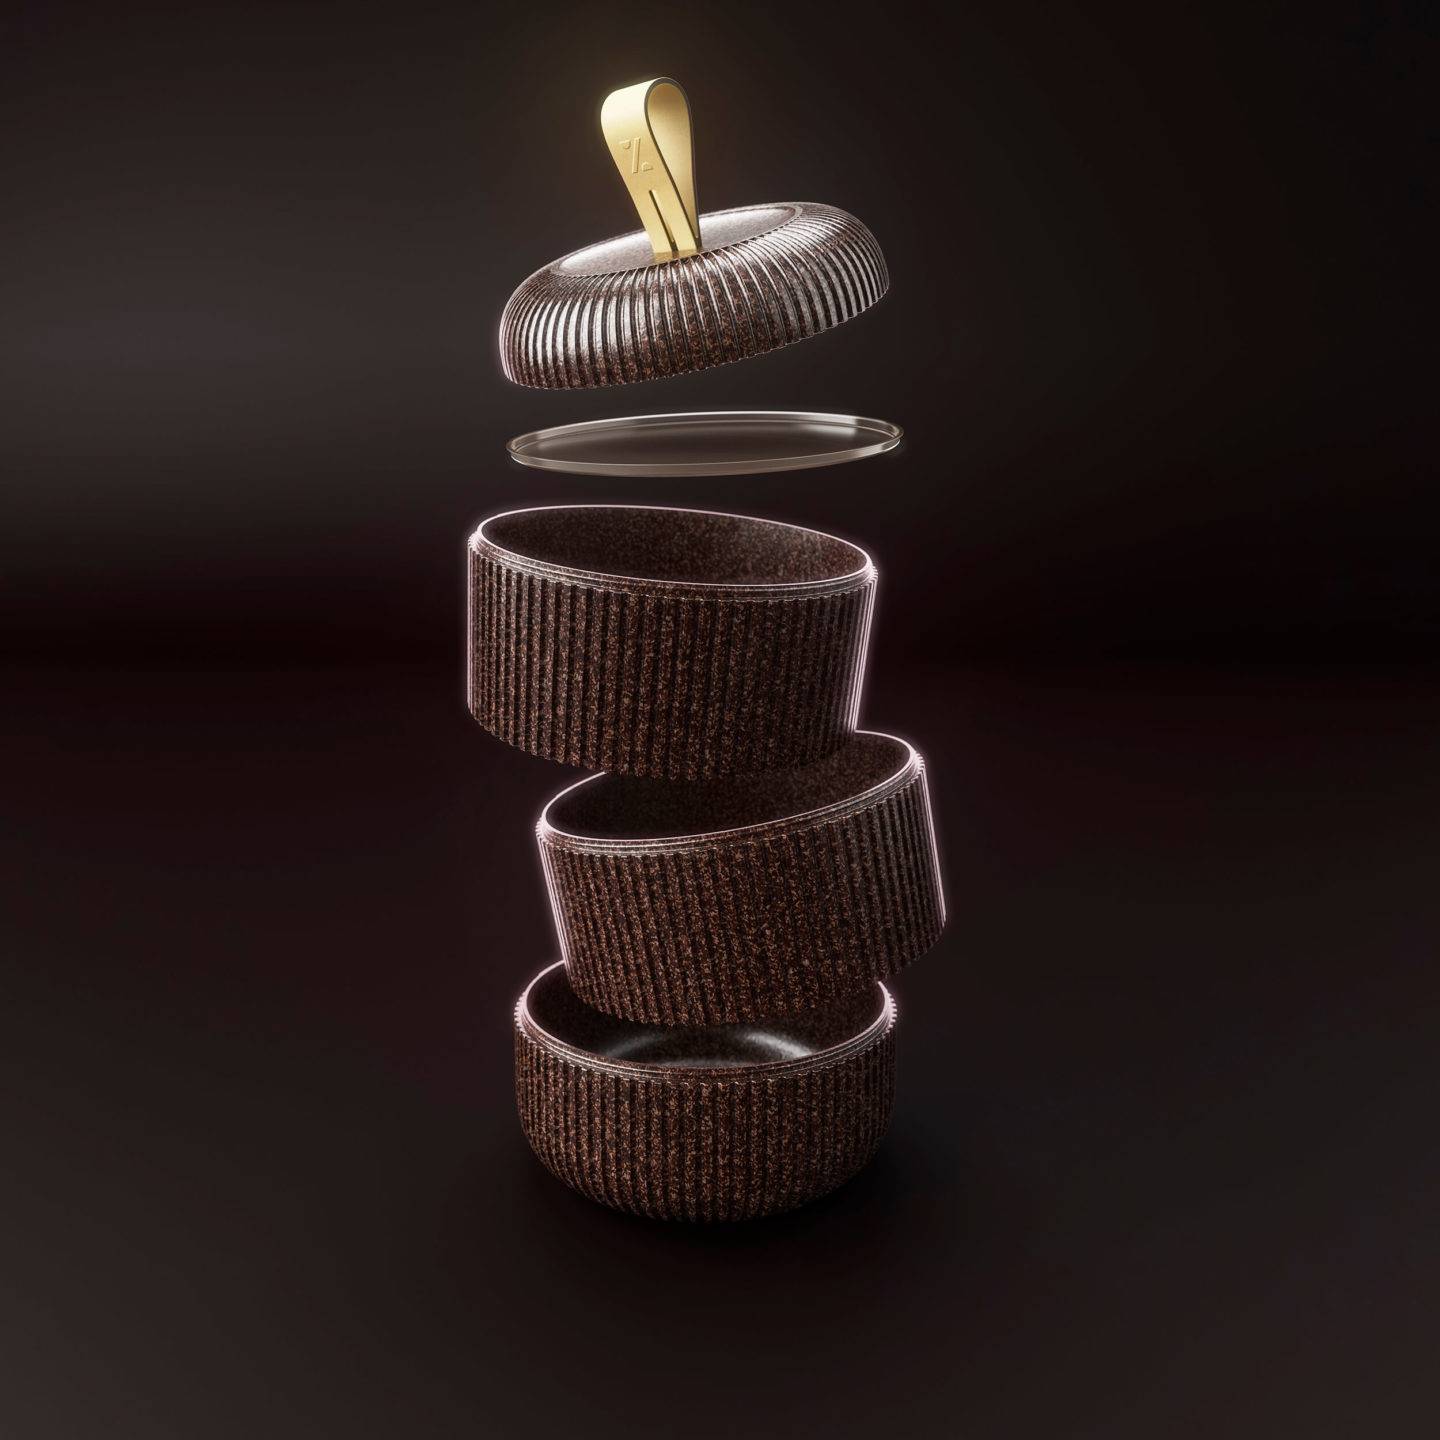 Exploded view of a stacked brown bento box style food container, against a dark background